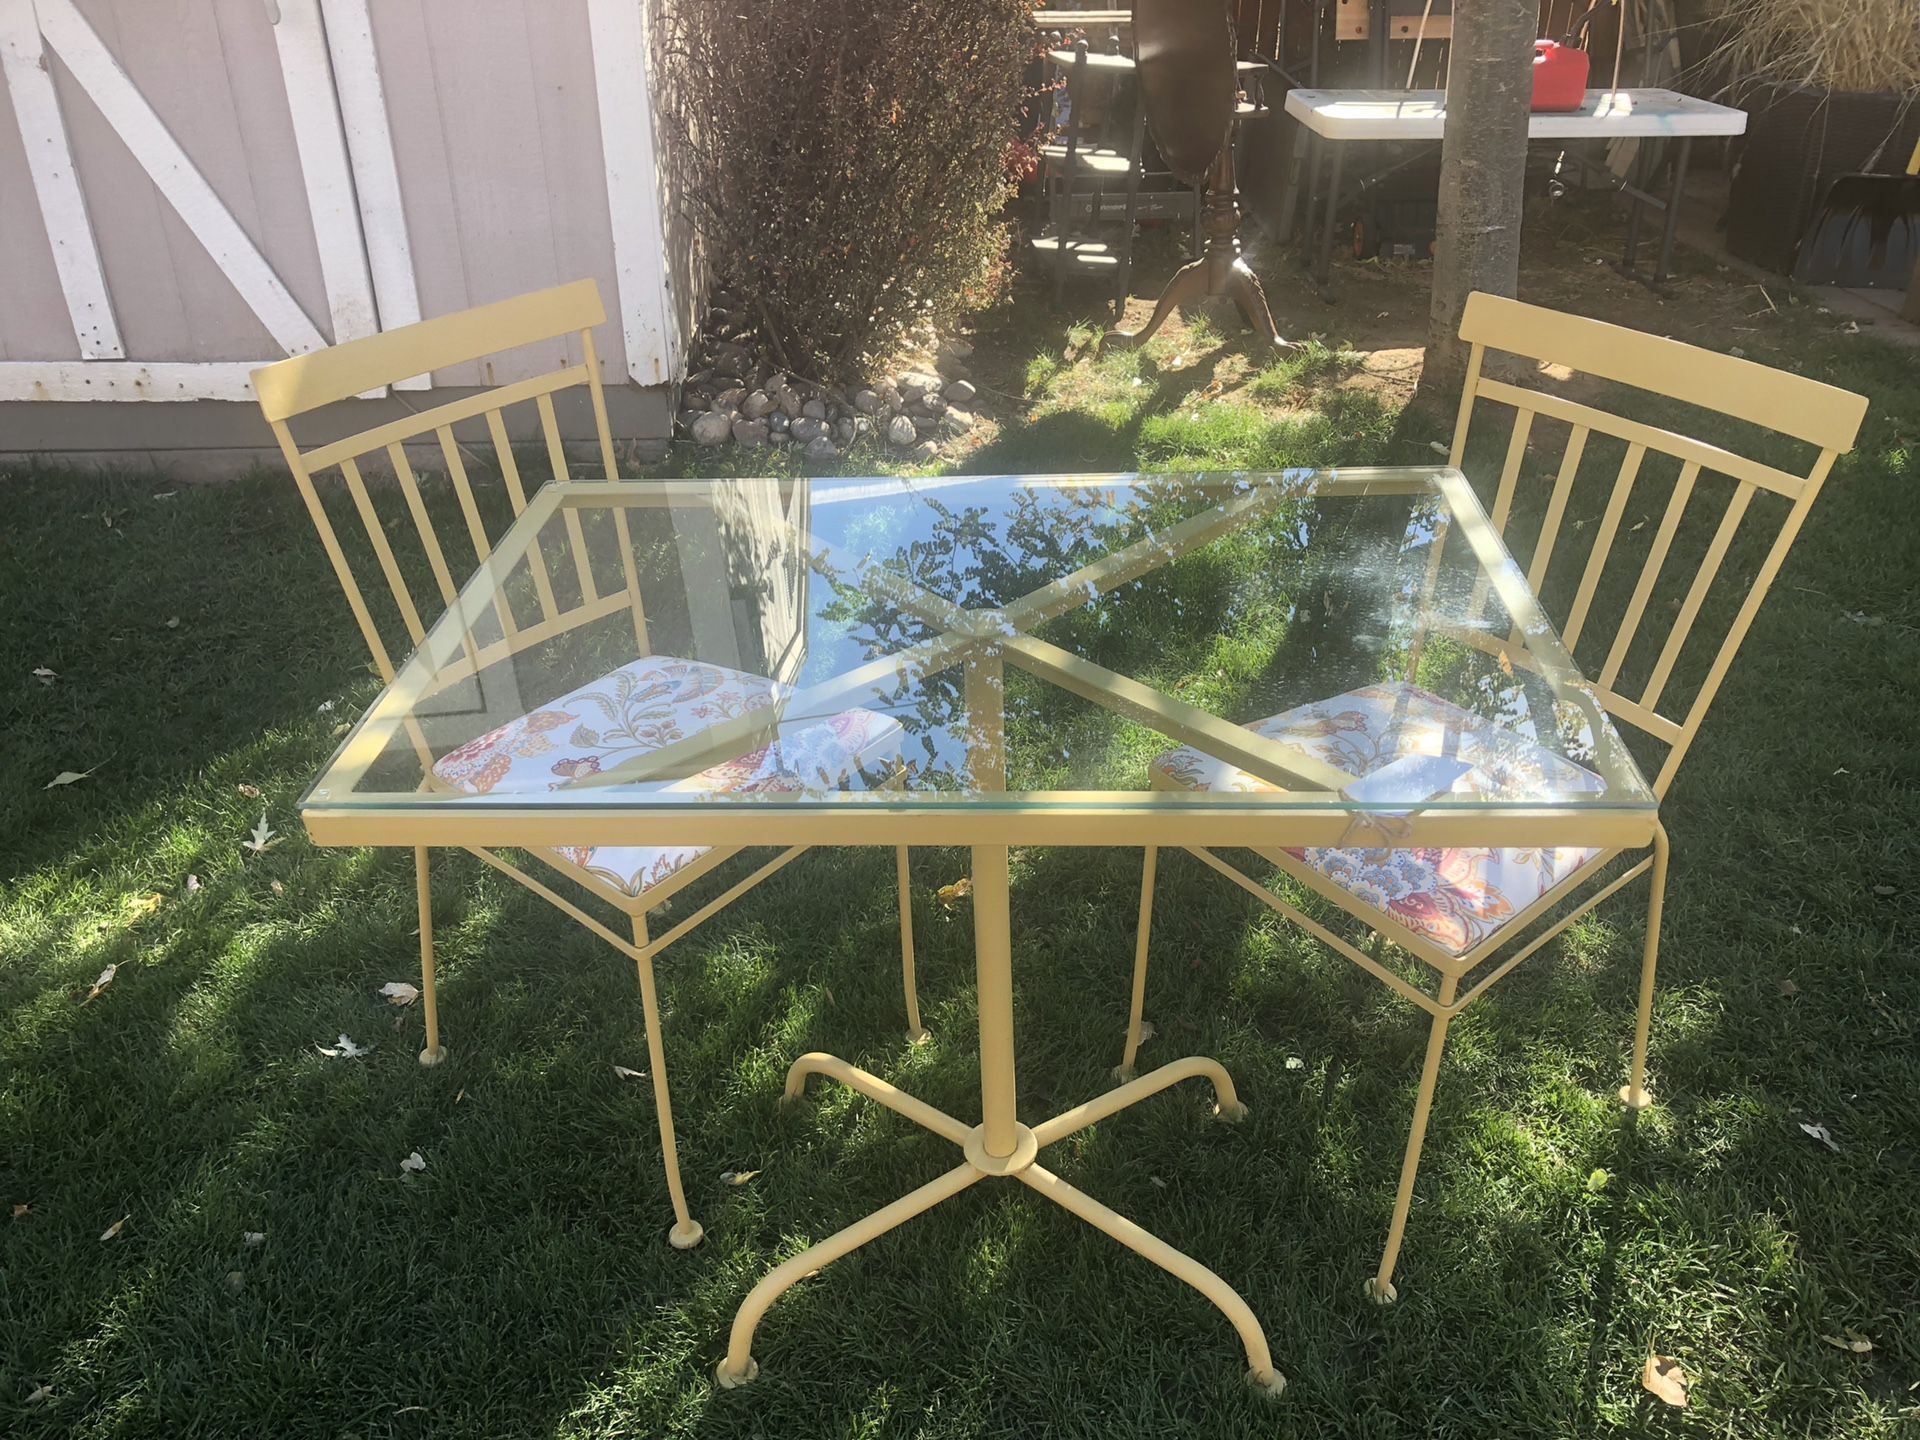 Vintage patio furniture: glass top wrought iron table and 2 chairs